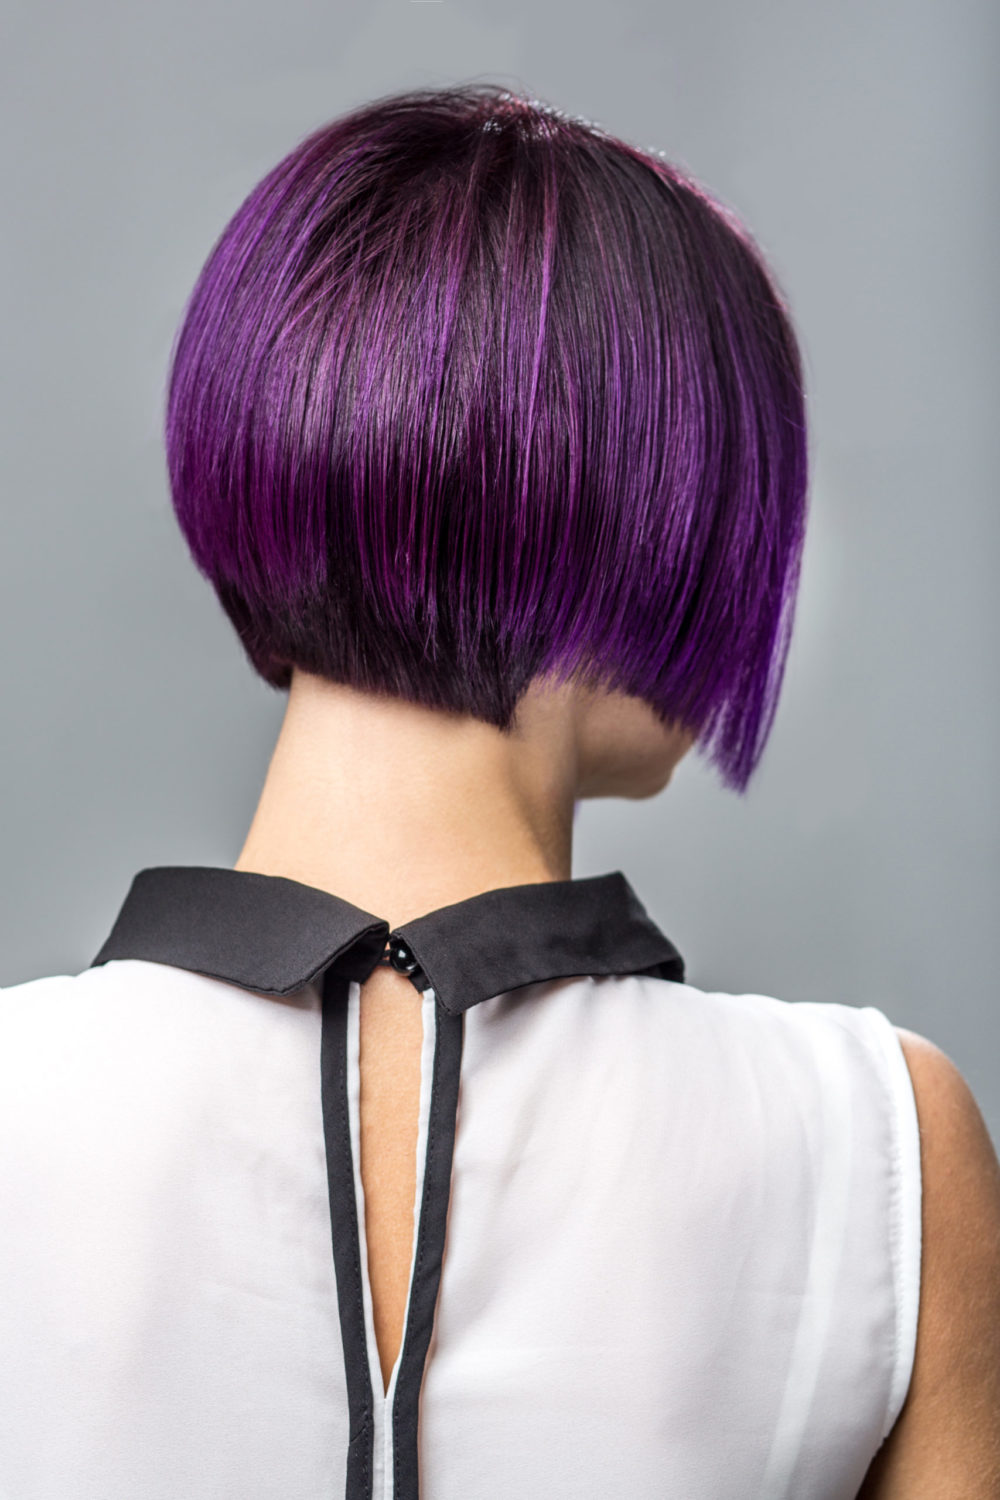 Tapered Short Inverted Bob, a featured short haircut for thick hair